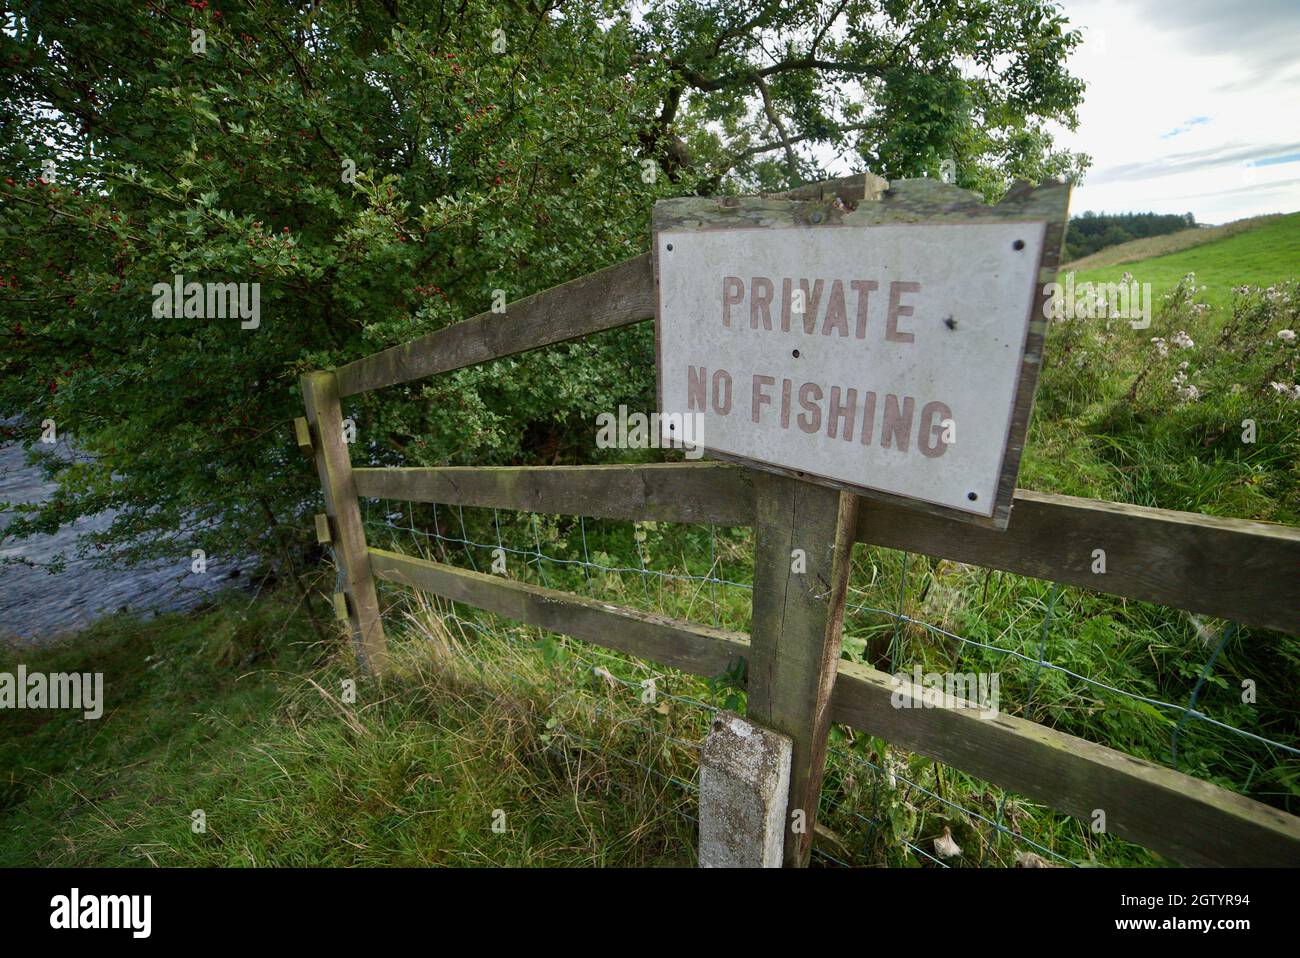 PRIVATE- NO FISHING sign on a fence next to a river/stream in Northumberland, UK. A wooden fence with a sign post saying 'Private No Fishing'. Stock Photo